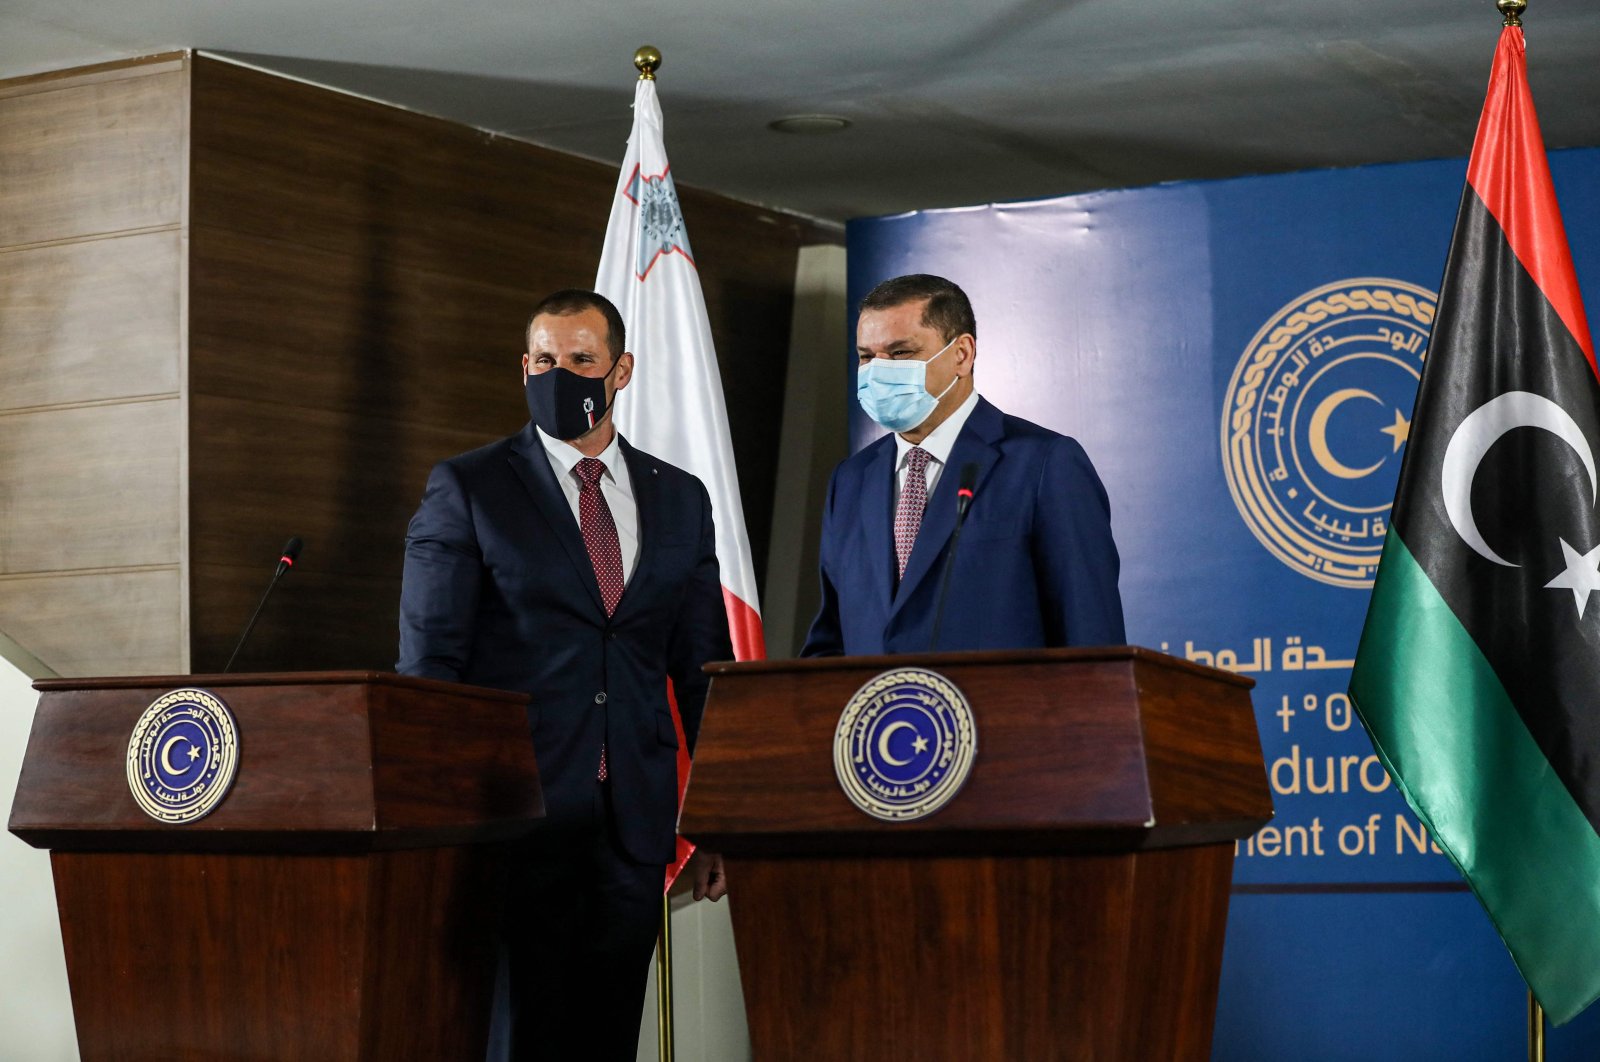 Malta's Prime Minister Robert Abela (L) and Libya's Prime Minister Abdul Hamid Dbeibah give a joint press conference at the prime minister's office in Tripoli, Libya, April 5, 2021. (AFP Photo)